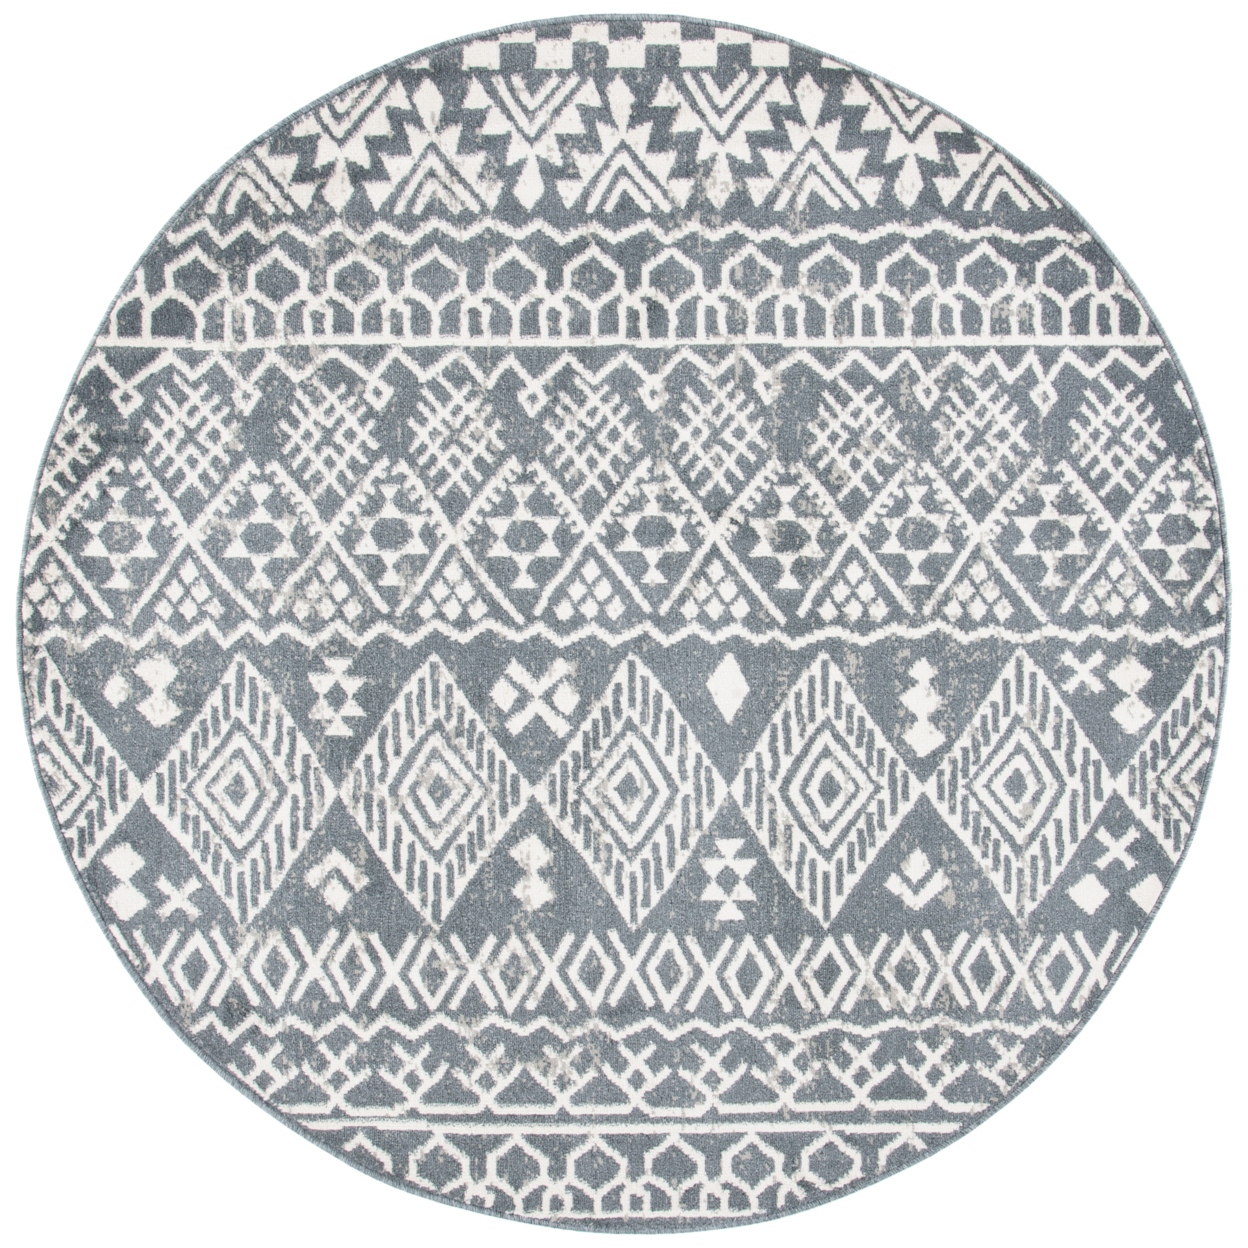 SAFAVIEH Pyramid Collection PYR205A Ivory / Charcoal Rug - 6-7 X 6-7 Round